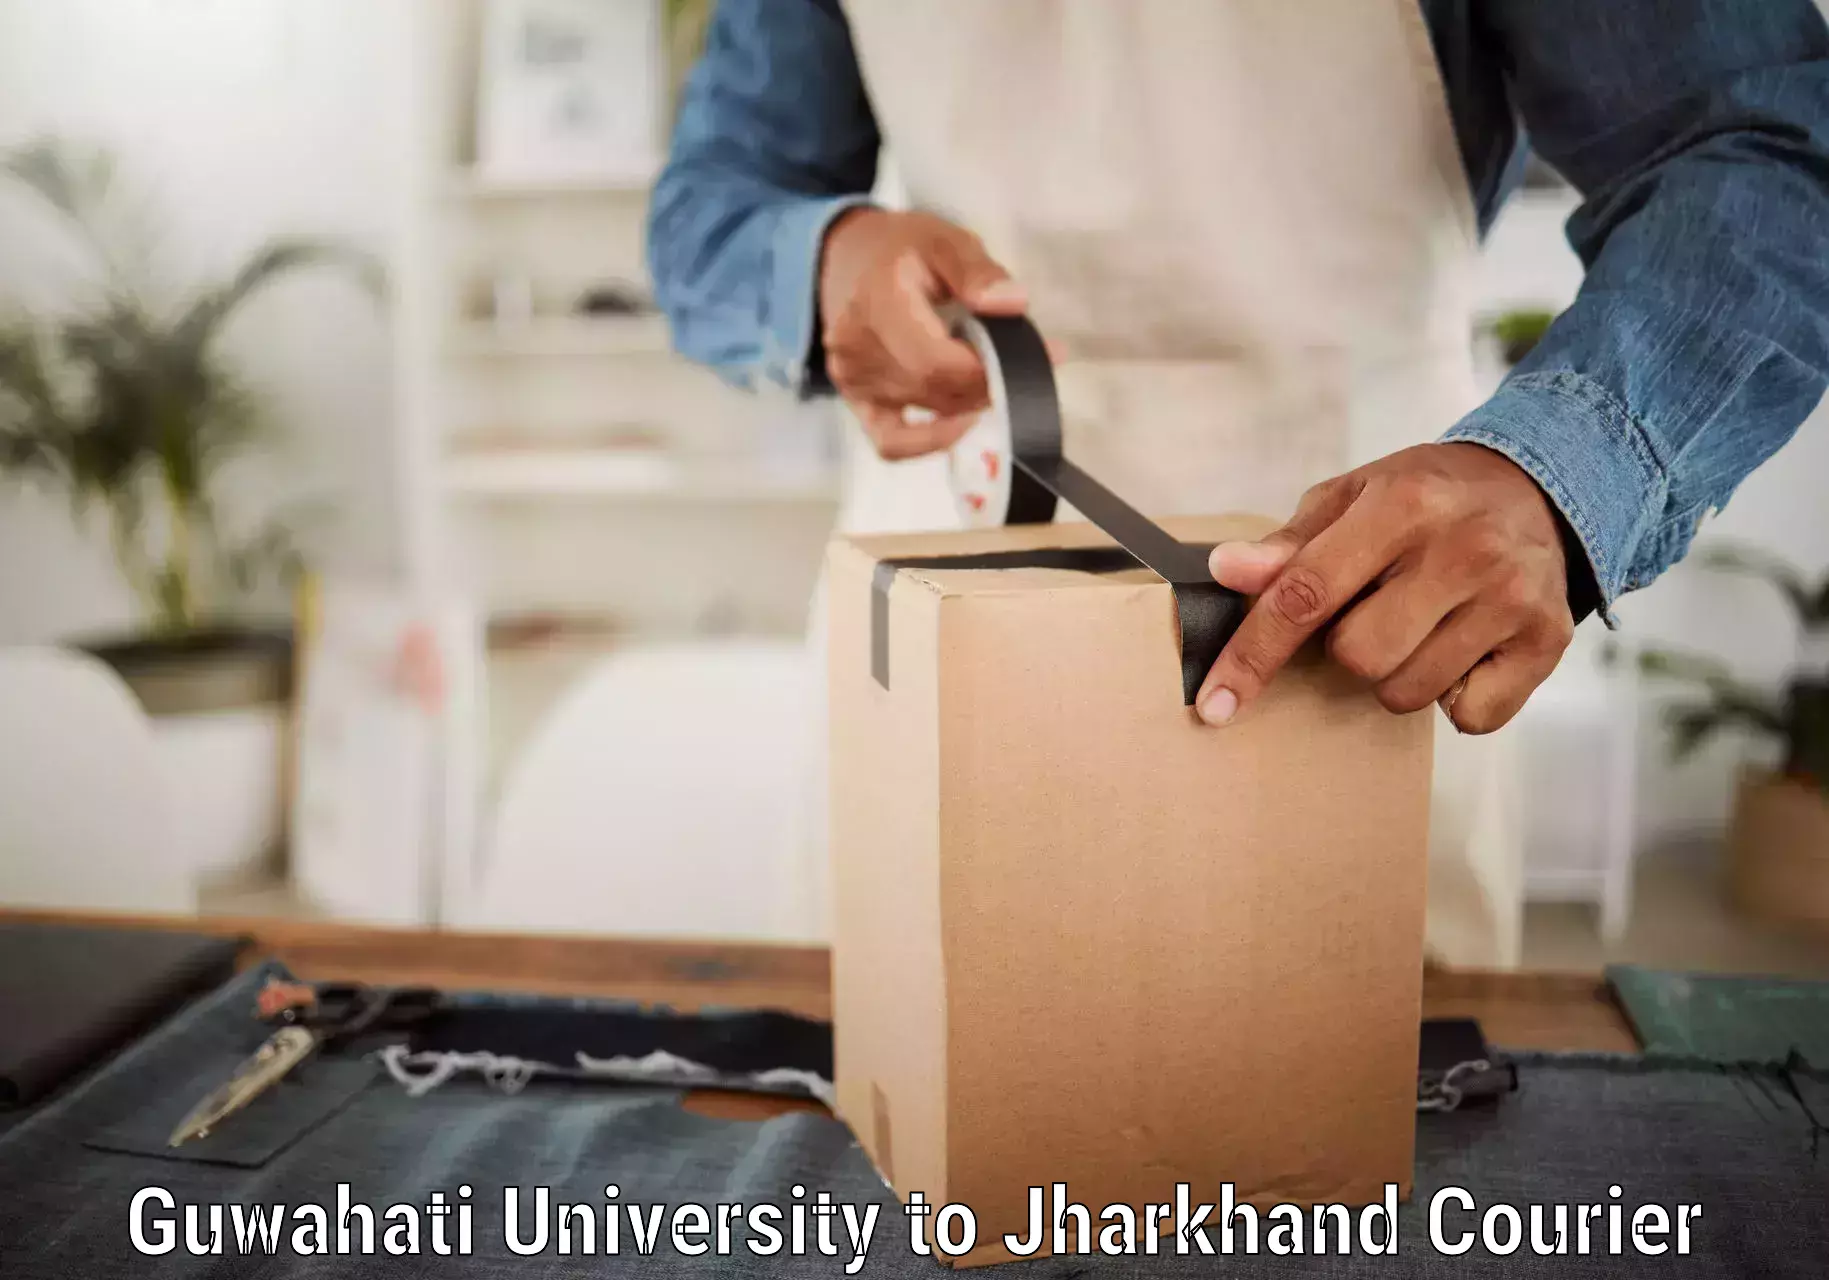 Nationwide parcel services Guwahati University to Chaibasa